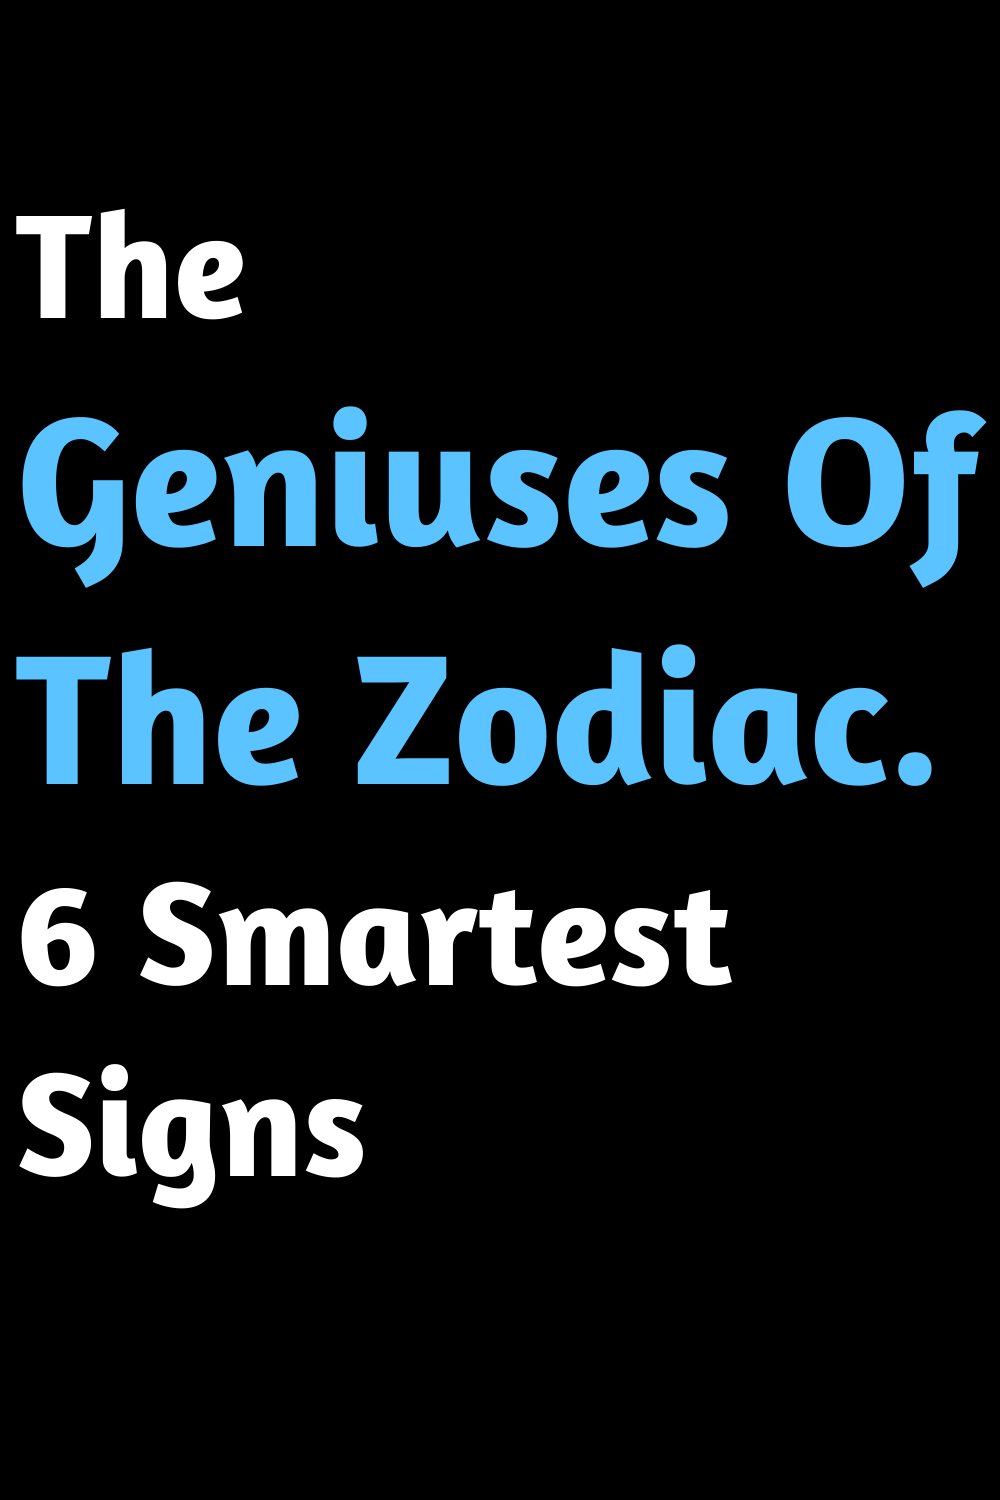 The Geniuses Of The Zodiac. 6 Smartest Signs